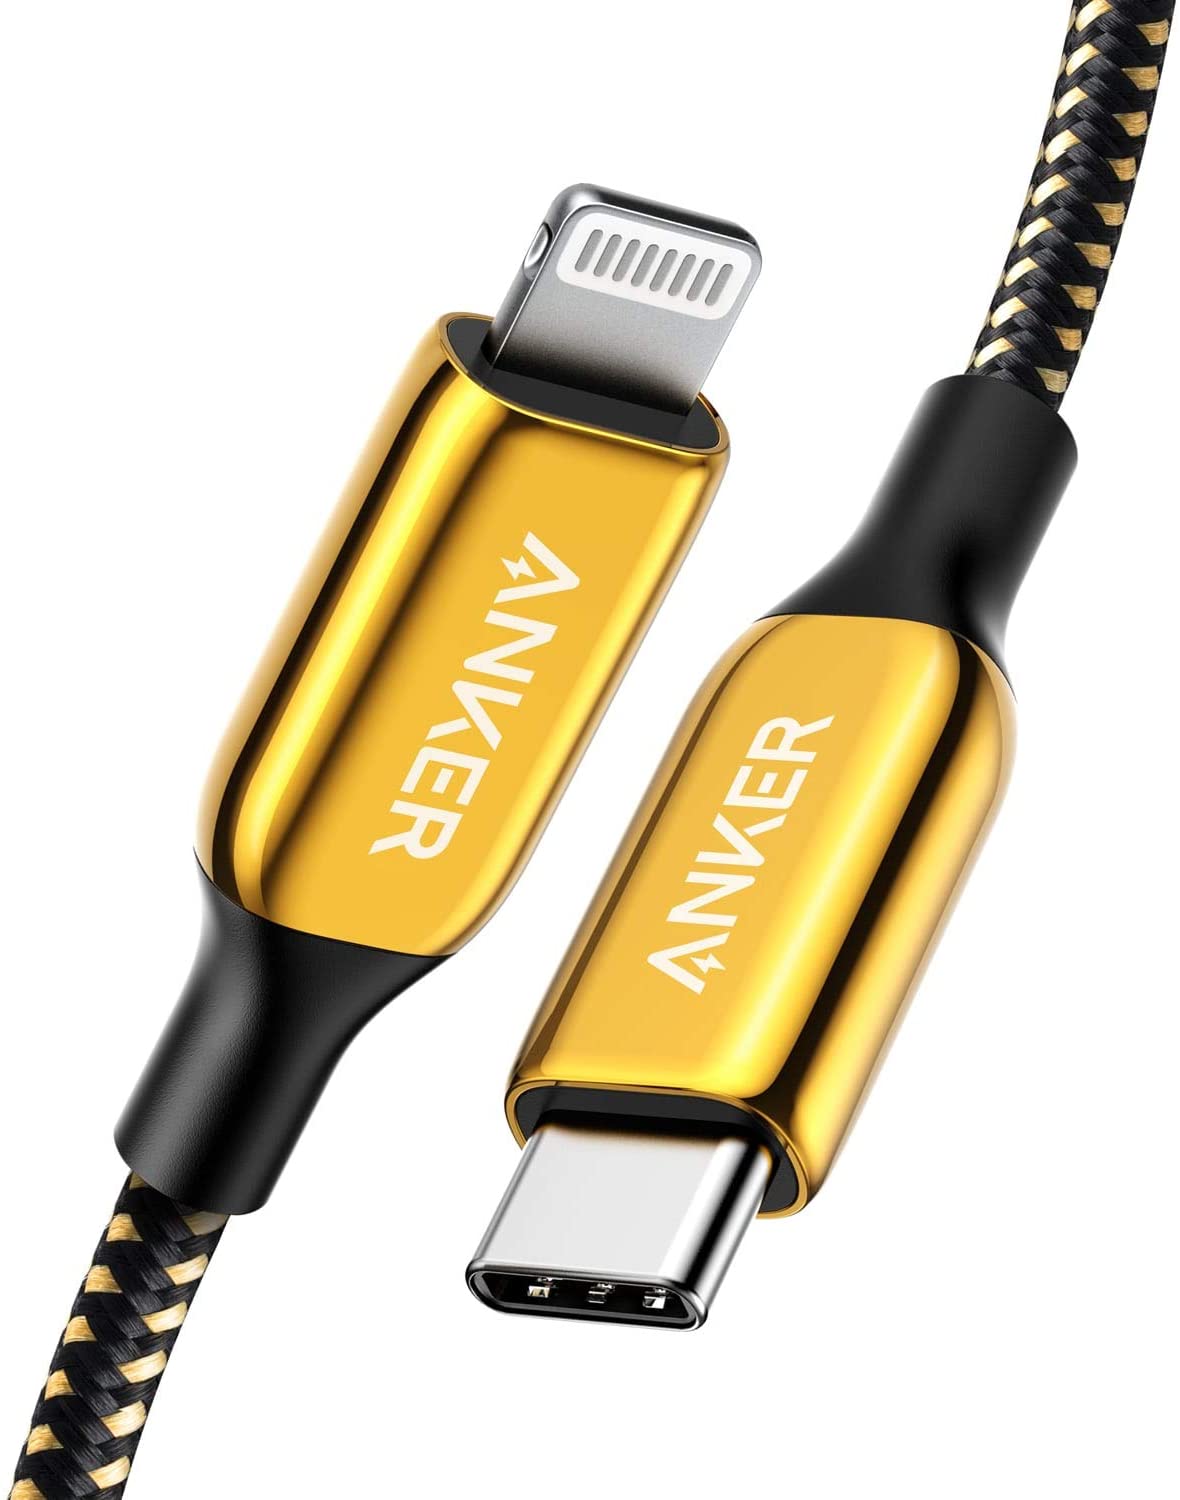 https://www.imore.com/sites/imore.com/files/styles/small/public/field/image/2020/05/anker-powerline-iii-24k-gold-edition-render.jpg?itok=jttOttcY